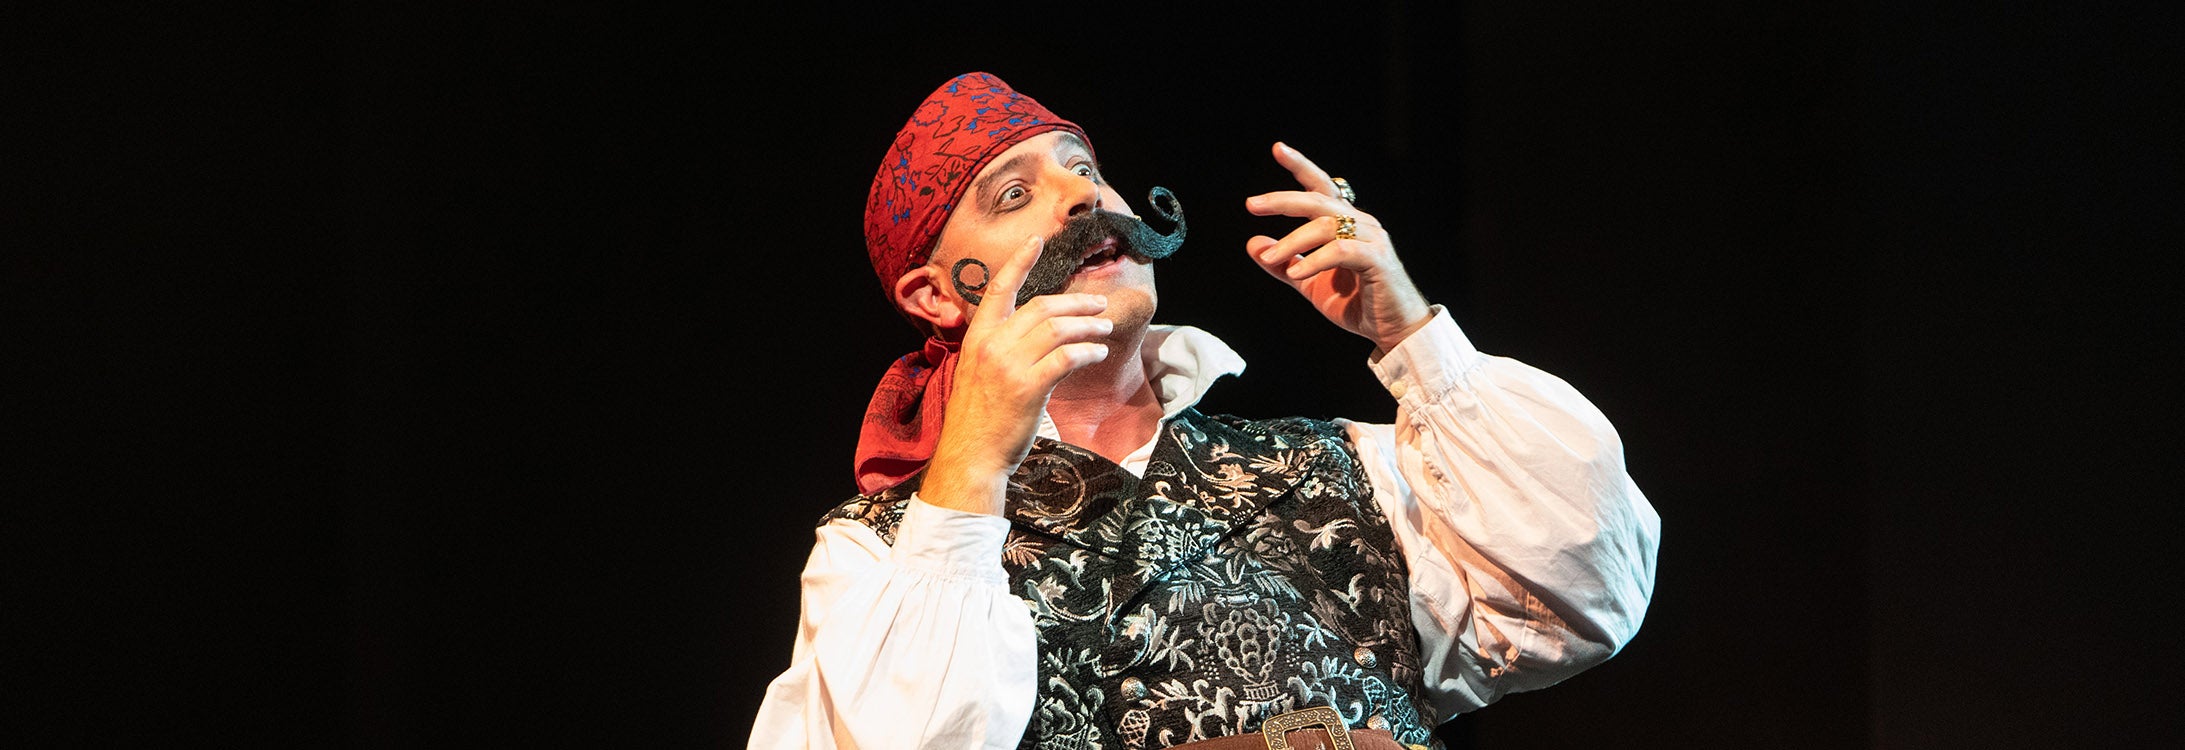 ECU professor Gregory Funaro portrays the villainous Black Stache in “Peter and the Starcatcher.” (Photos by Cliff Hollis)